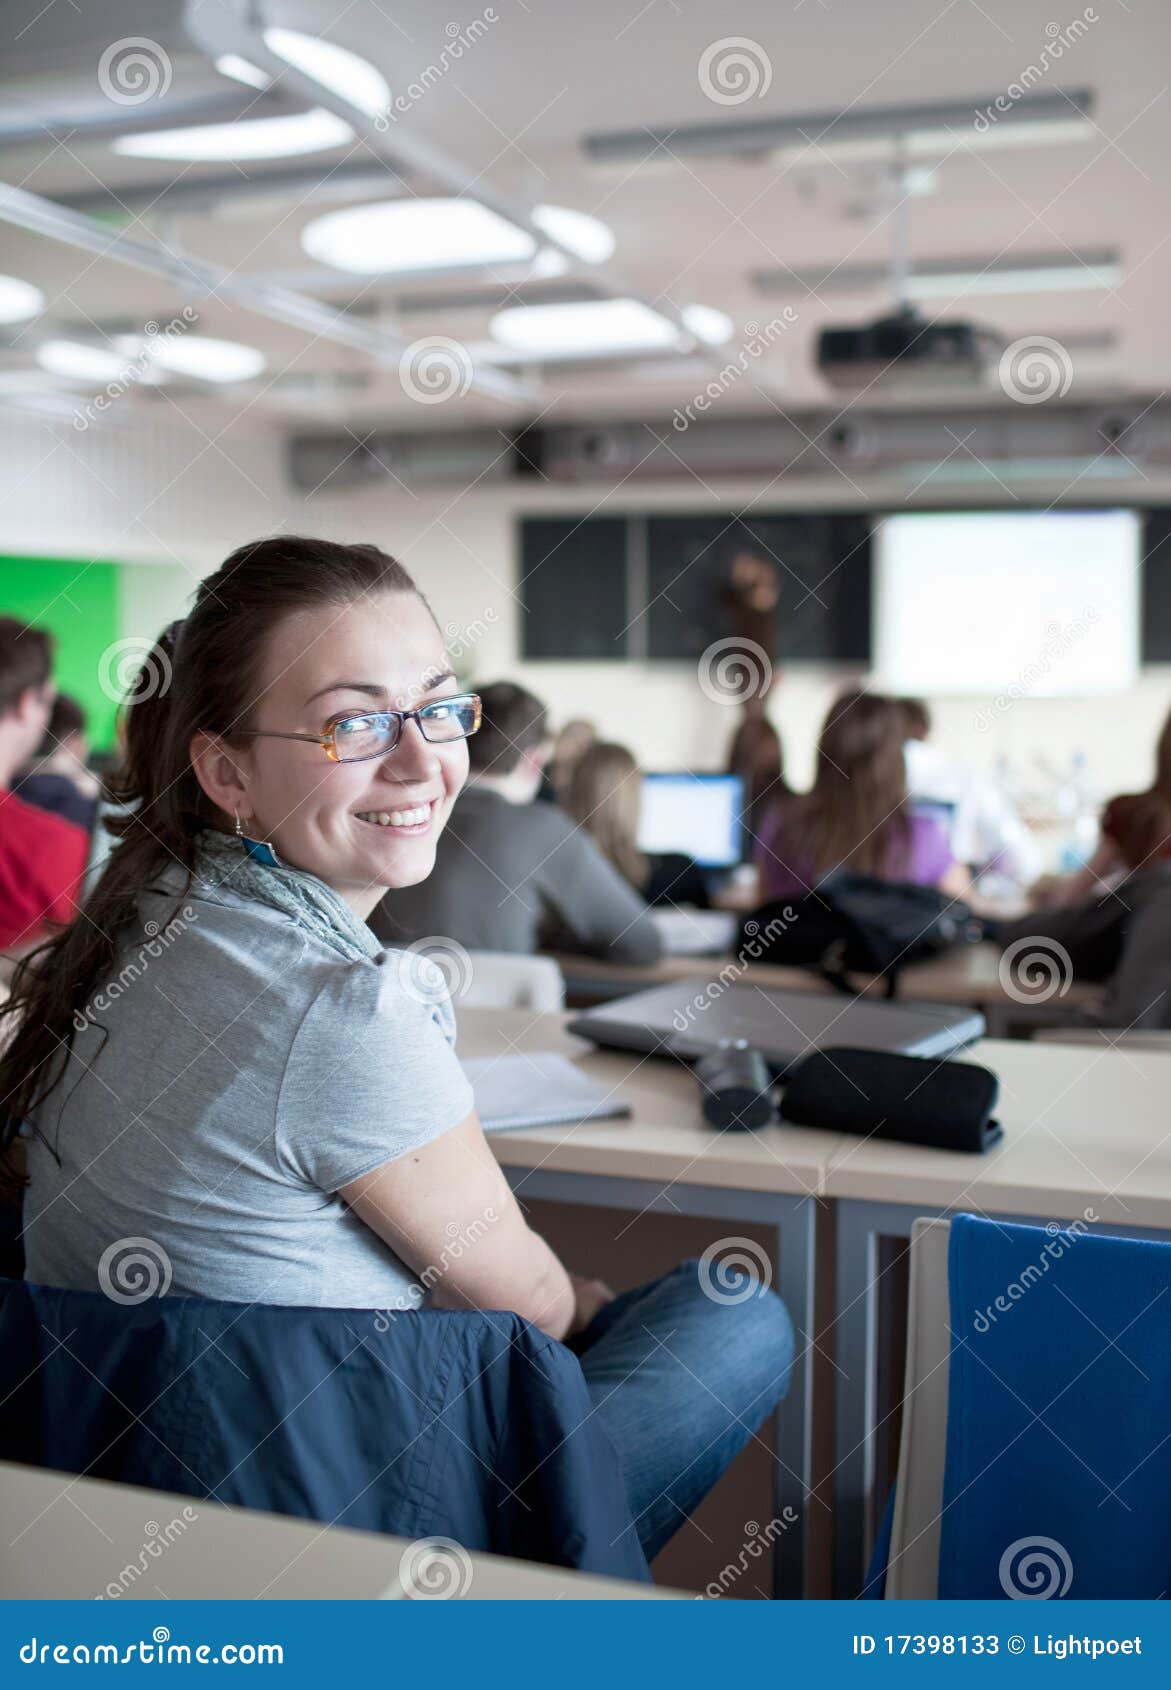 Female College Student Sitting In A Classroom Stock Image - Image of